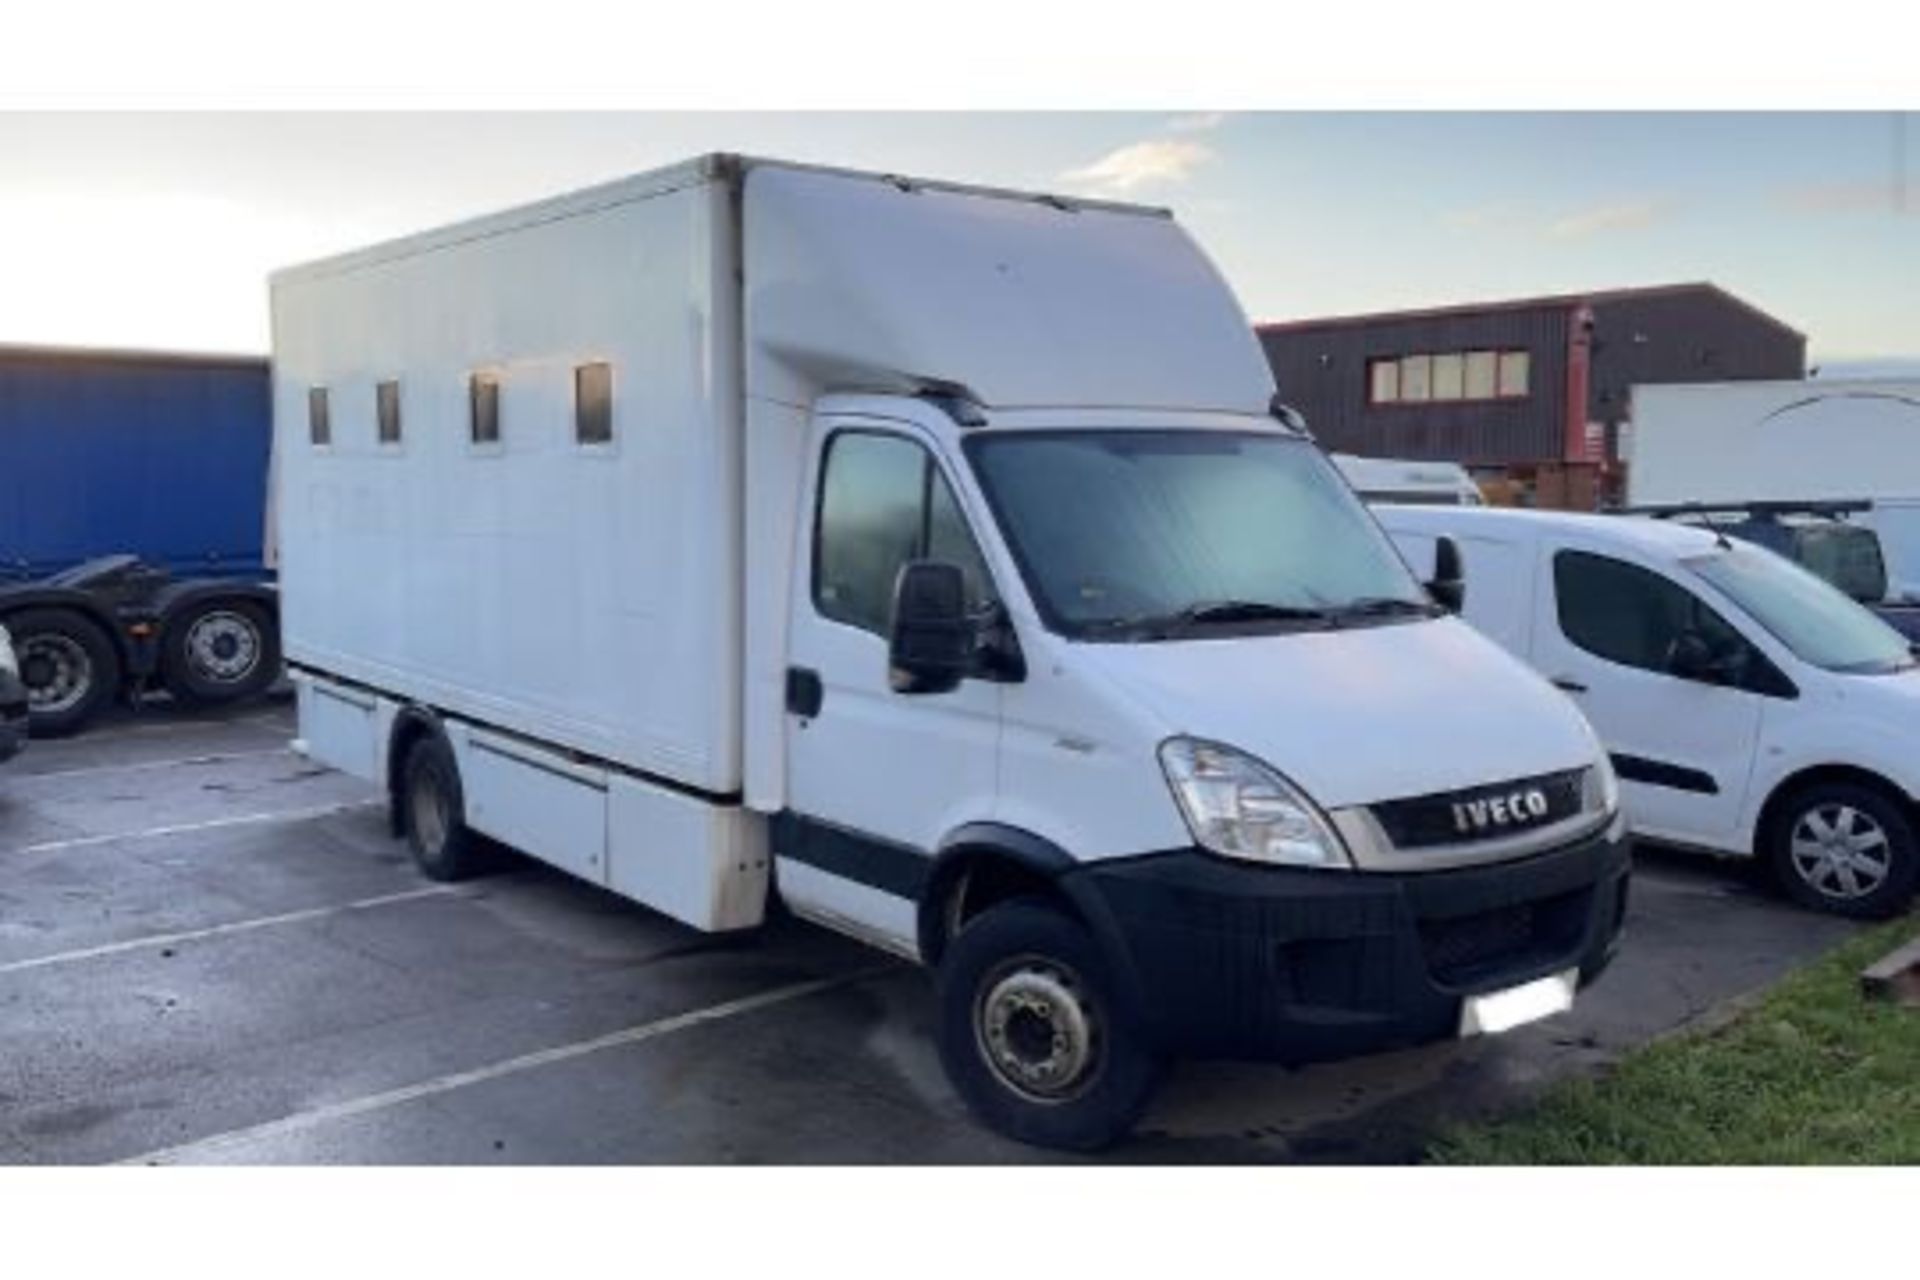 BX11 TCZ. 2011 IVECO DAILY 70C17. BOX VAN. 4X2. DIESEL MANUAL GEARBOX. REAR VIEW CAMERA 6 X SPEED